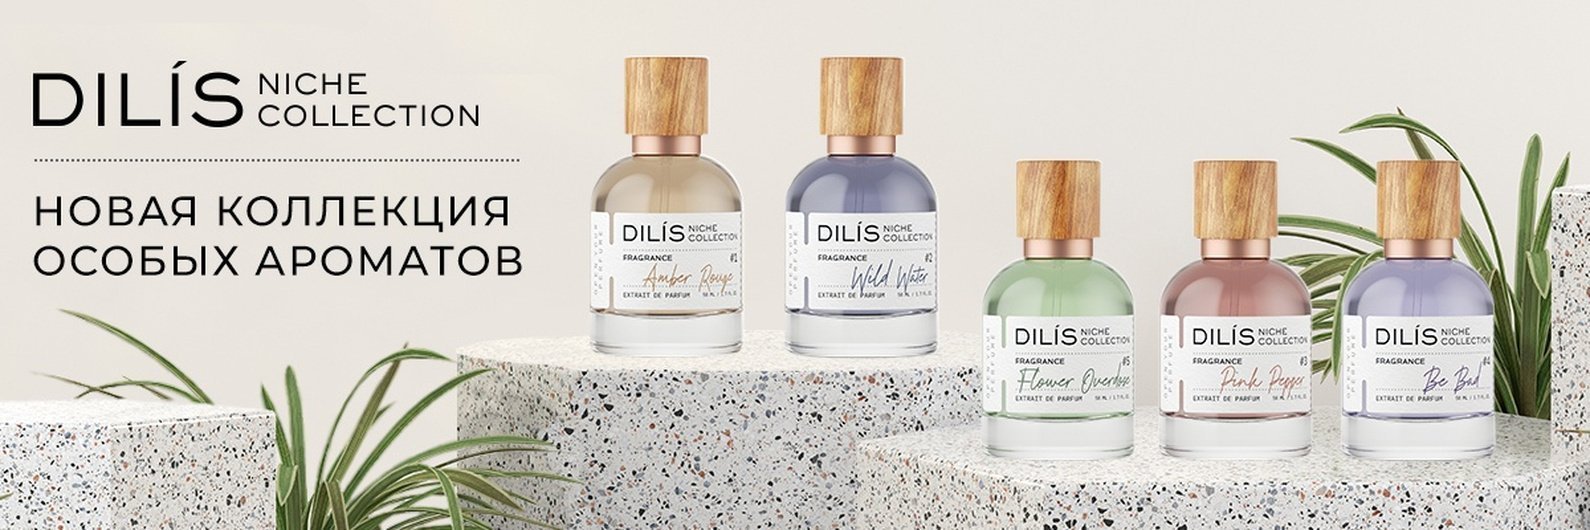 Dilis pepper. Духи Dilis Niche collection. Dilis Parfum Niche collection духи. Духи Экстра Niche collection. Dilis Niche collection аналоги.